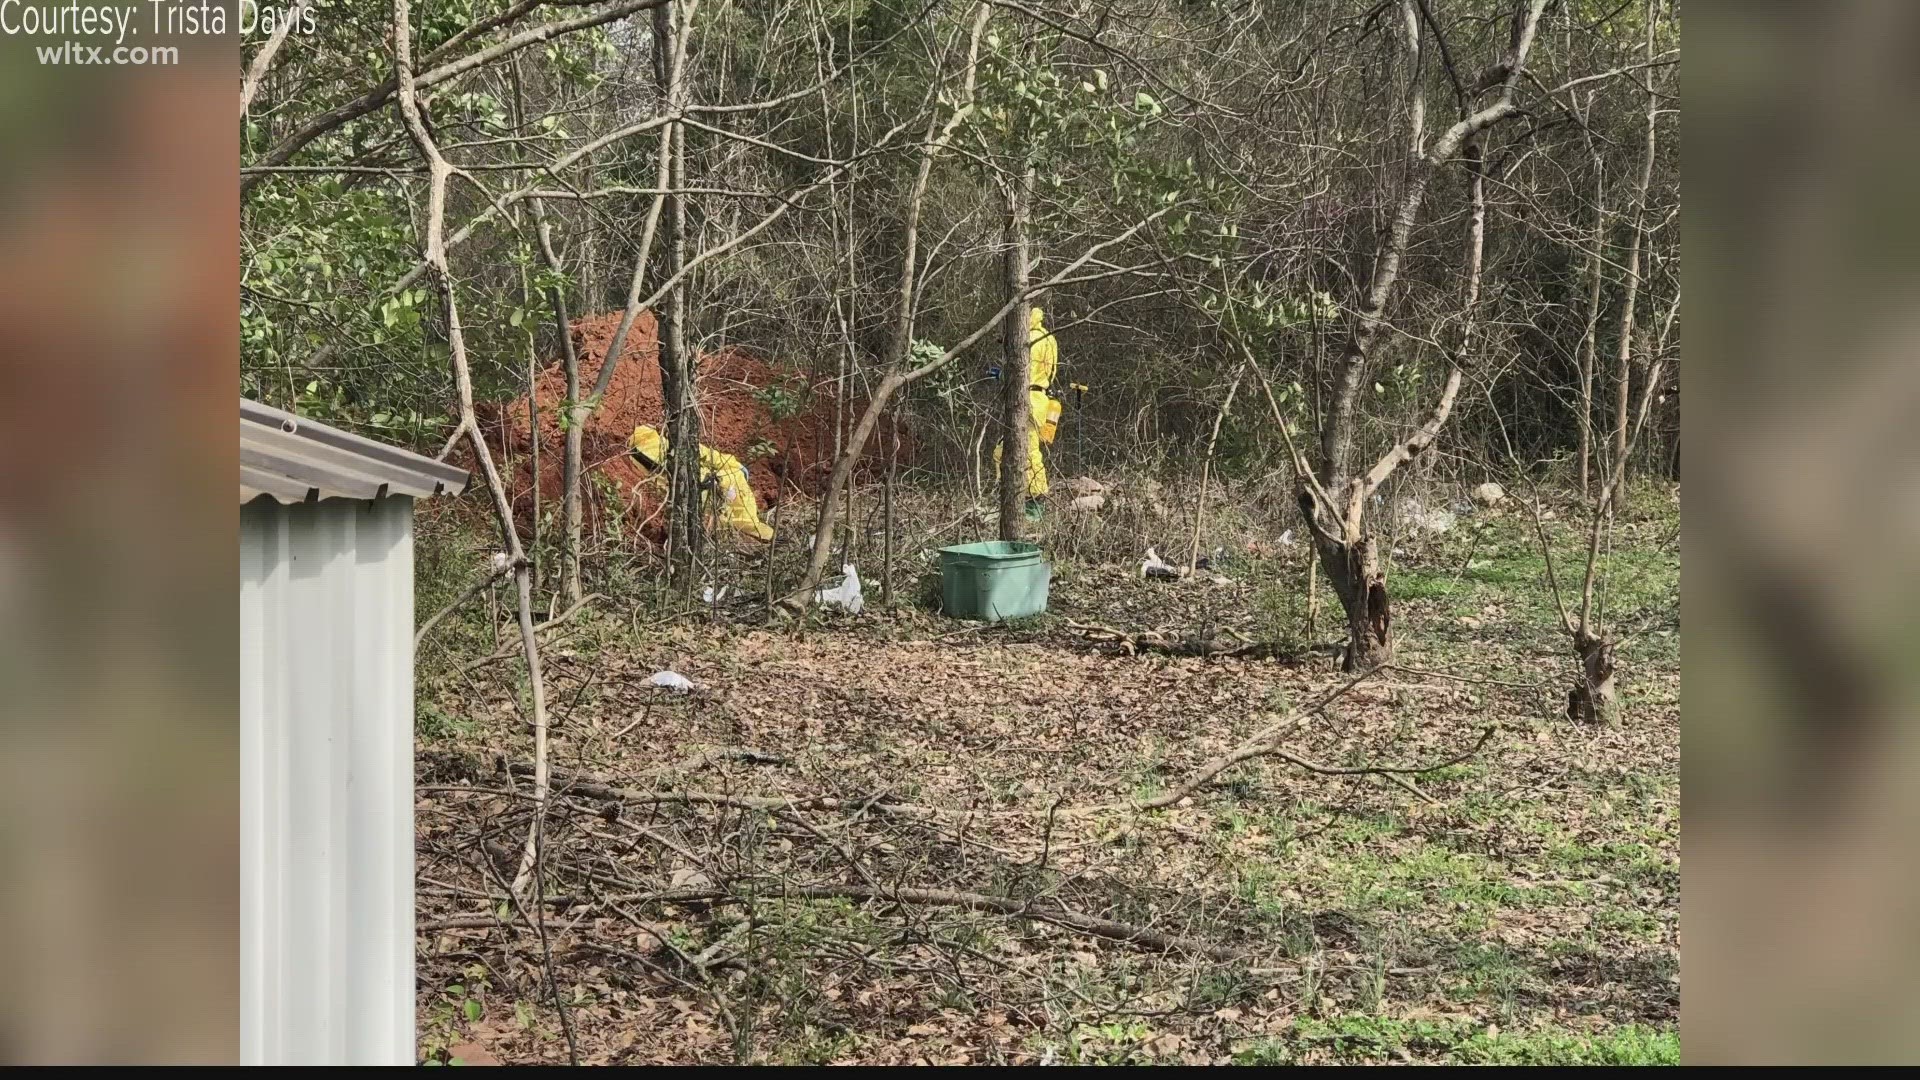 Here's the latest on a criminal investigation into what is alleged to be hazardous materials buried on a property in Winnsboro town limits.